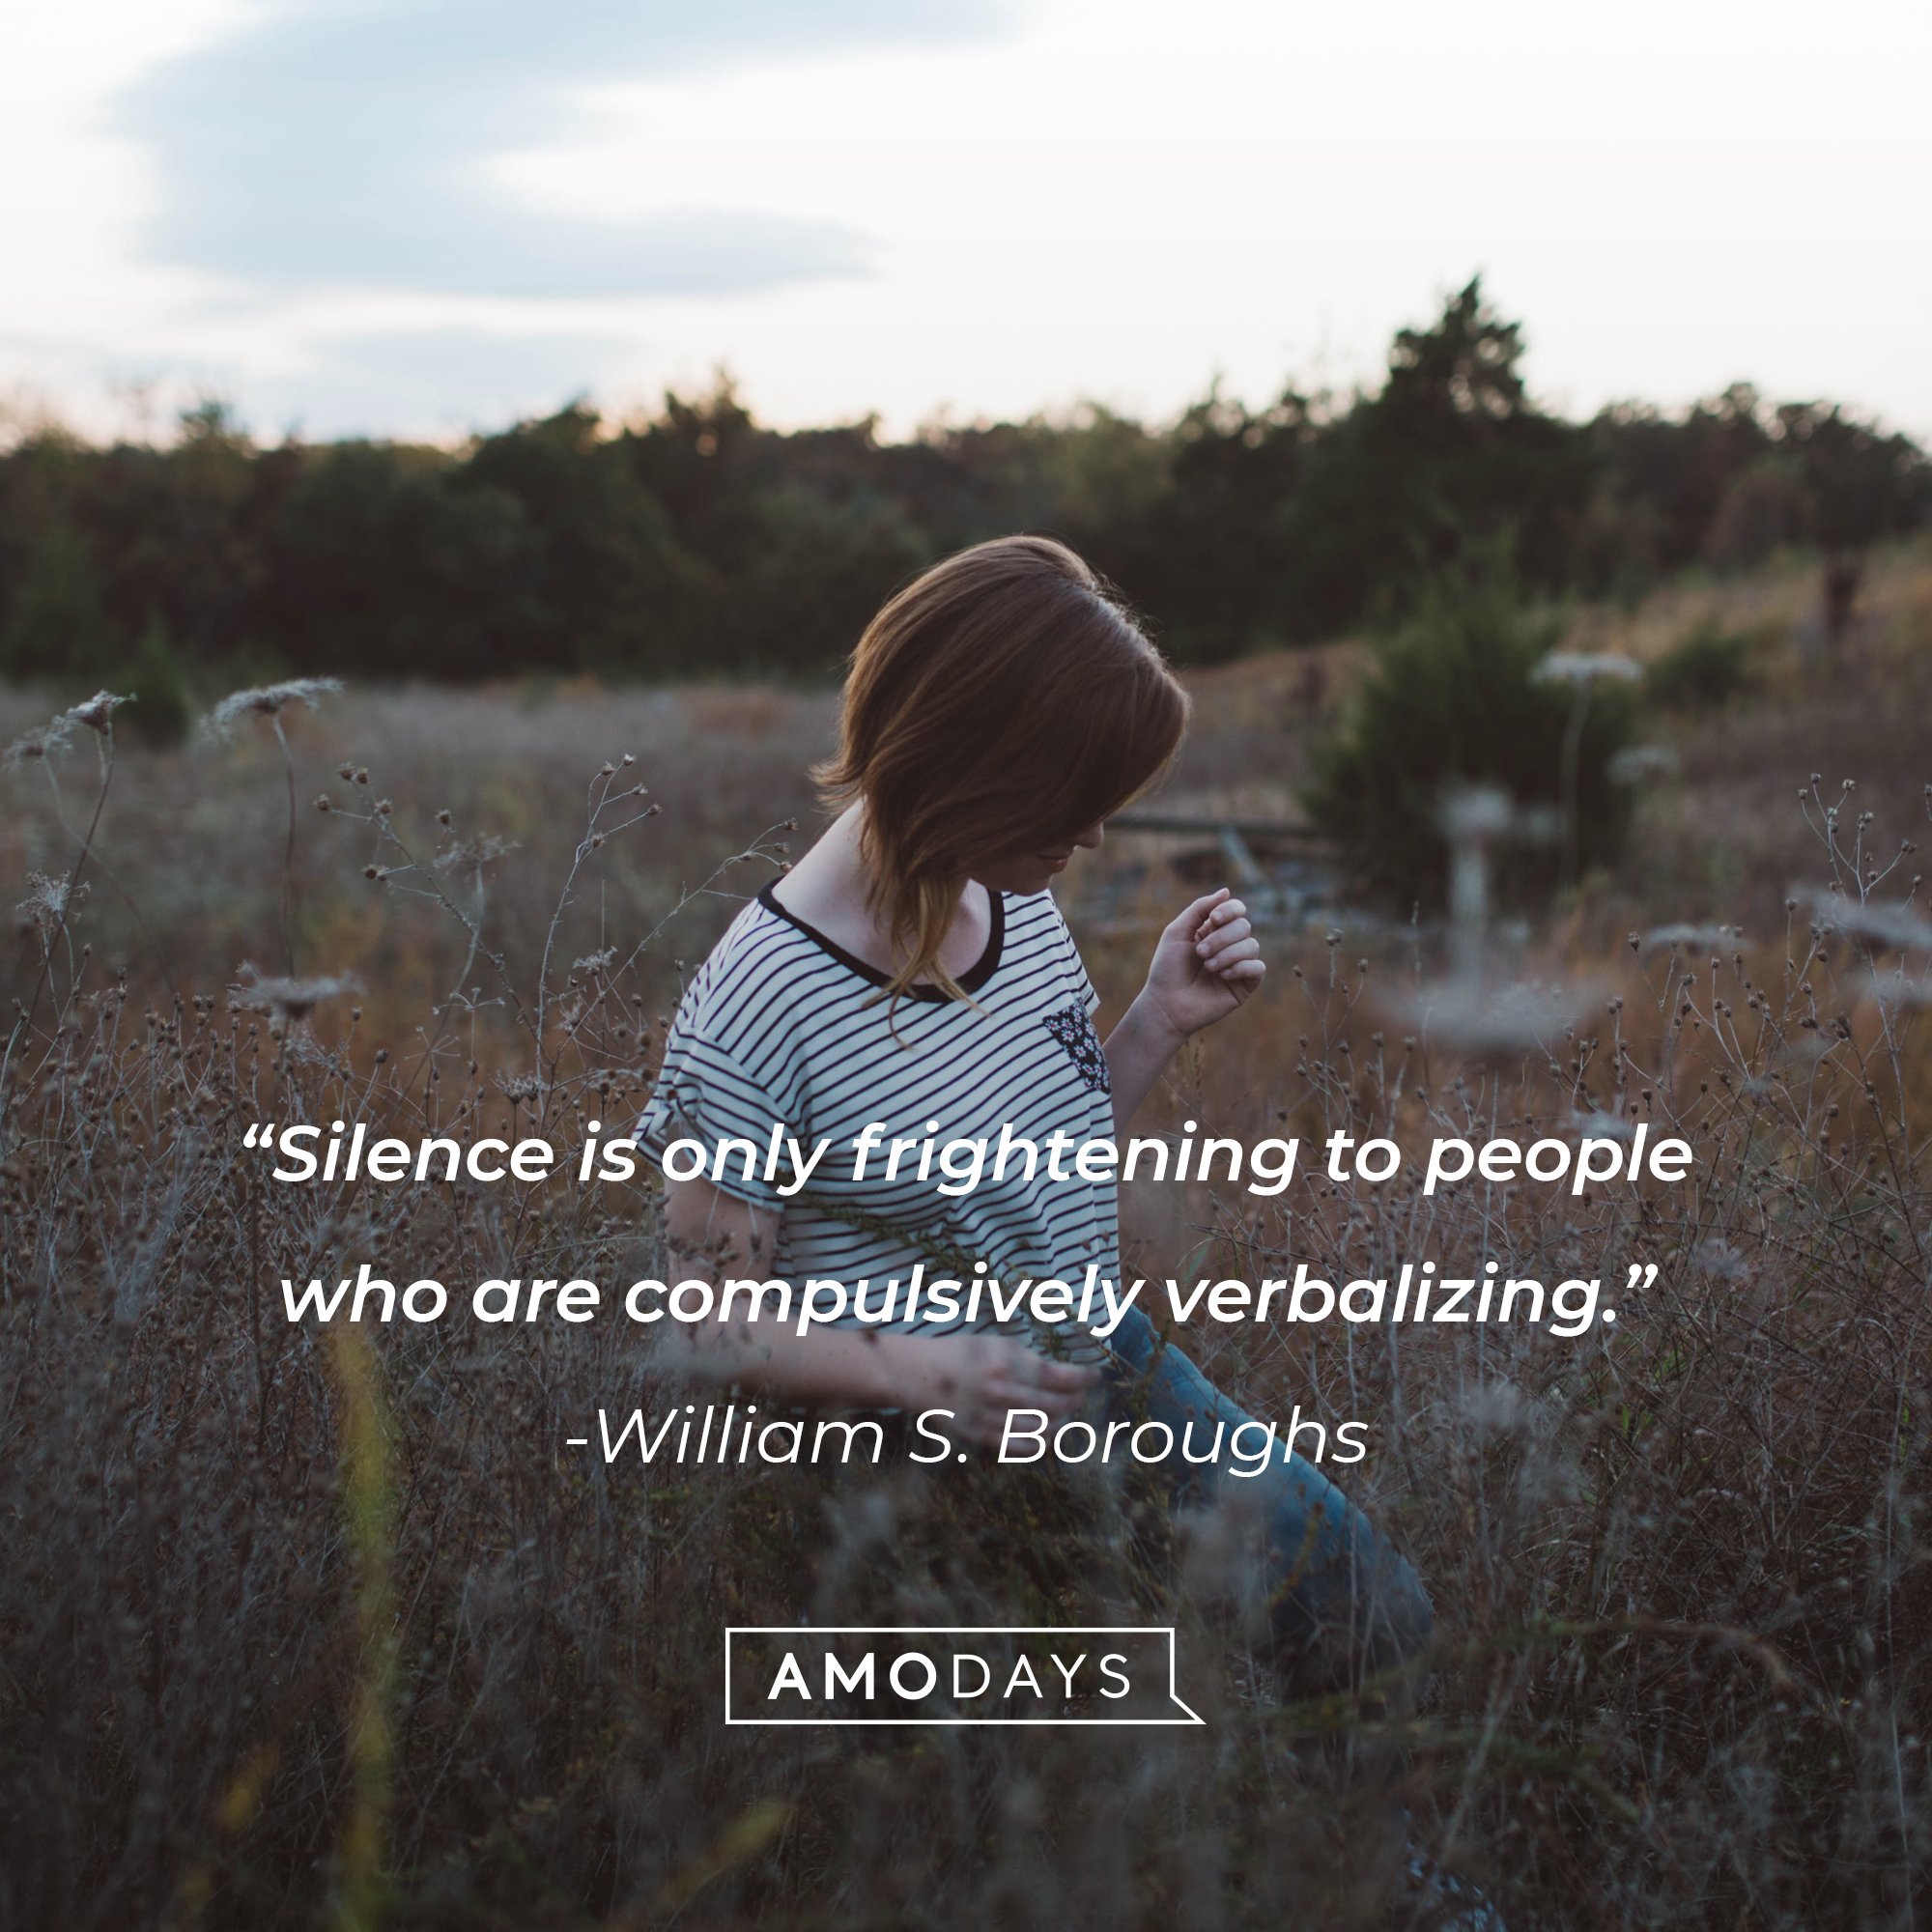 William S. Boroughs' quote: “Silence is only frightening to people who are compulsively verbalizing.” | Image: AmoDays